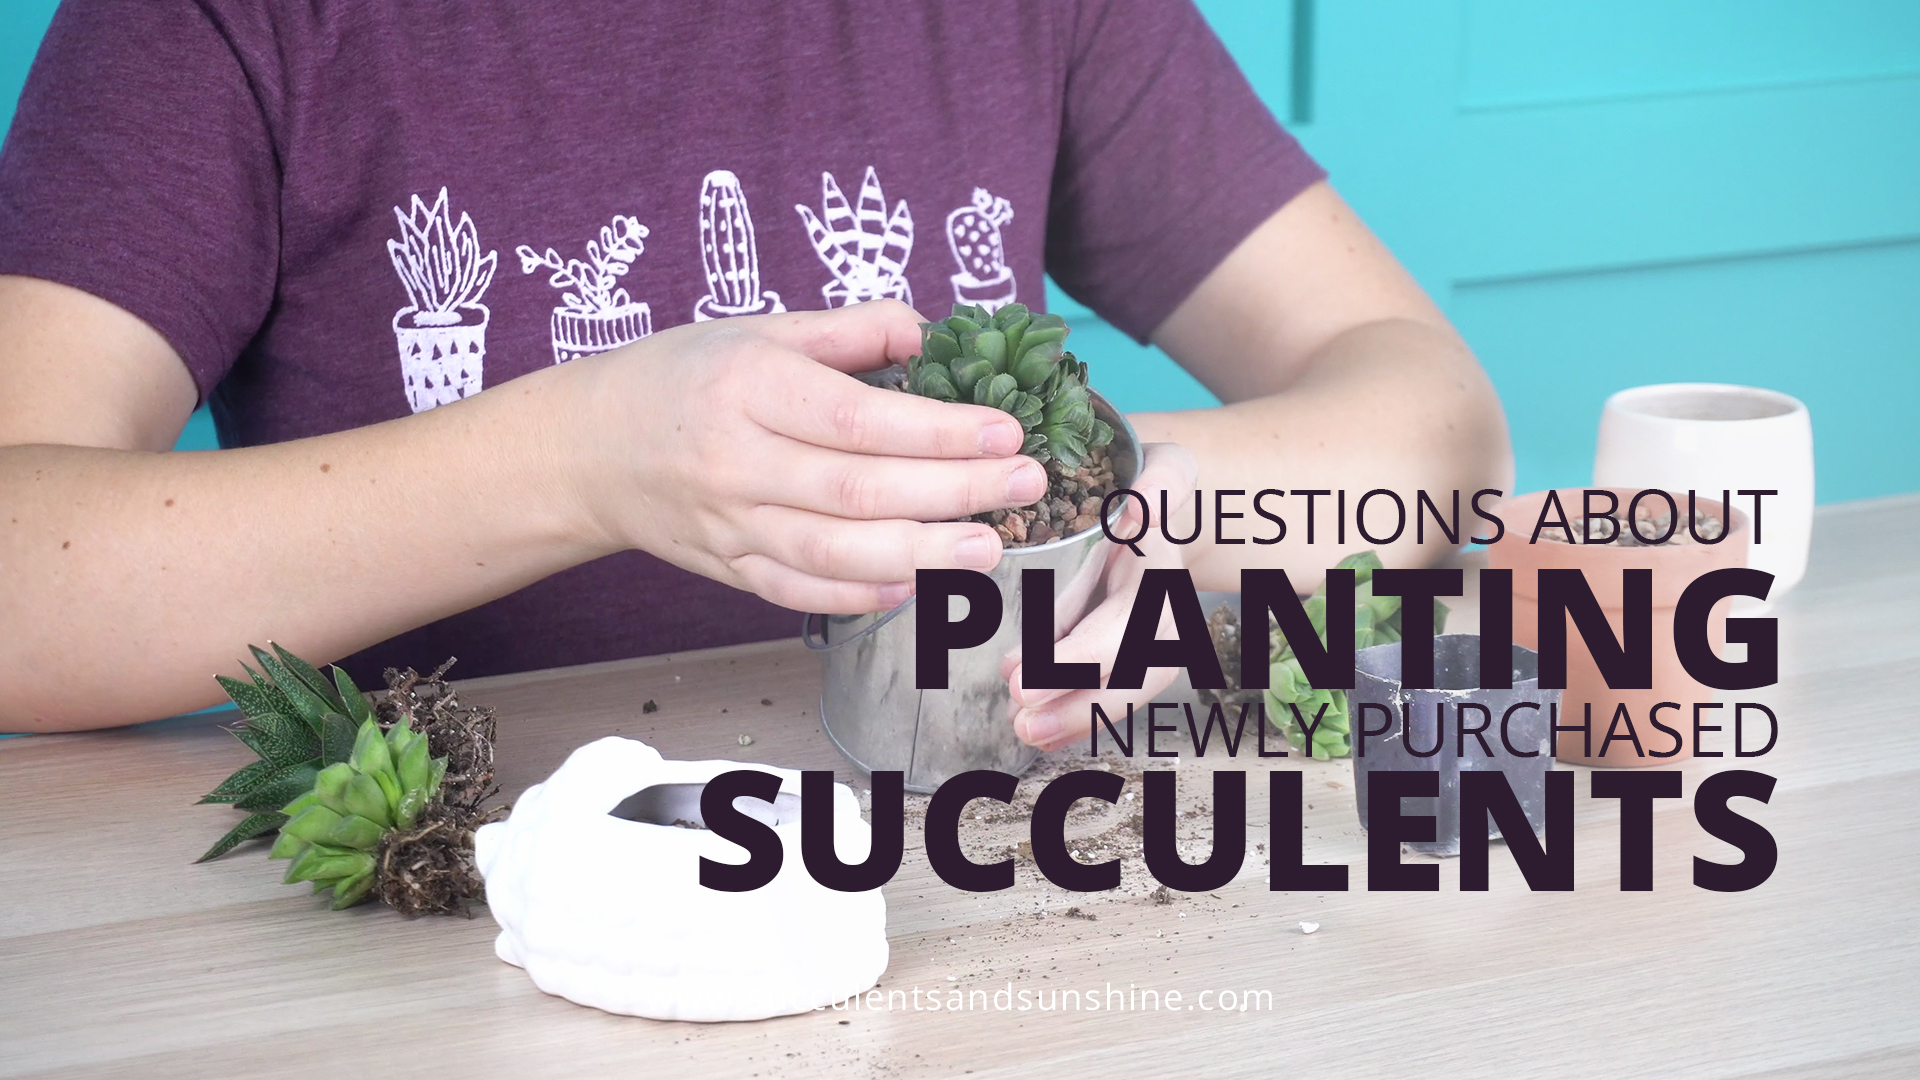 Common Questions About Planting Newly Purchased Succulents